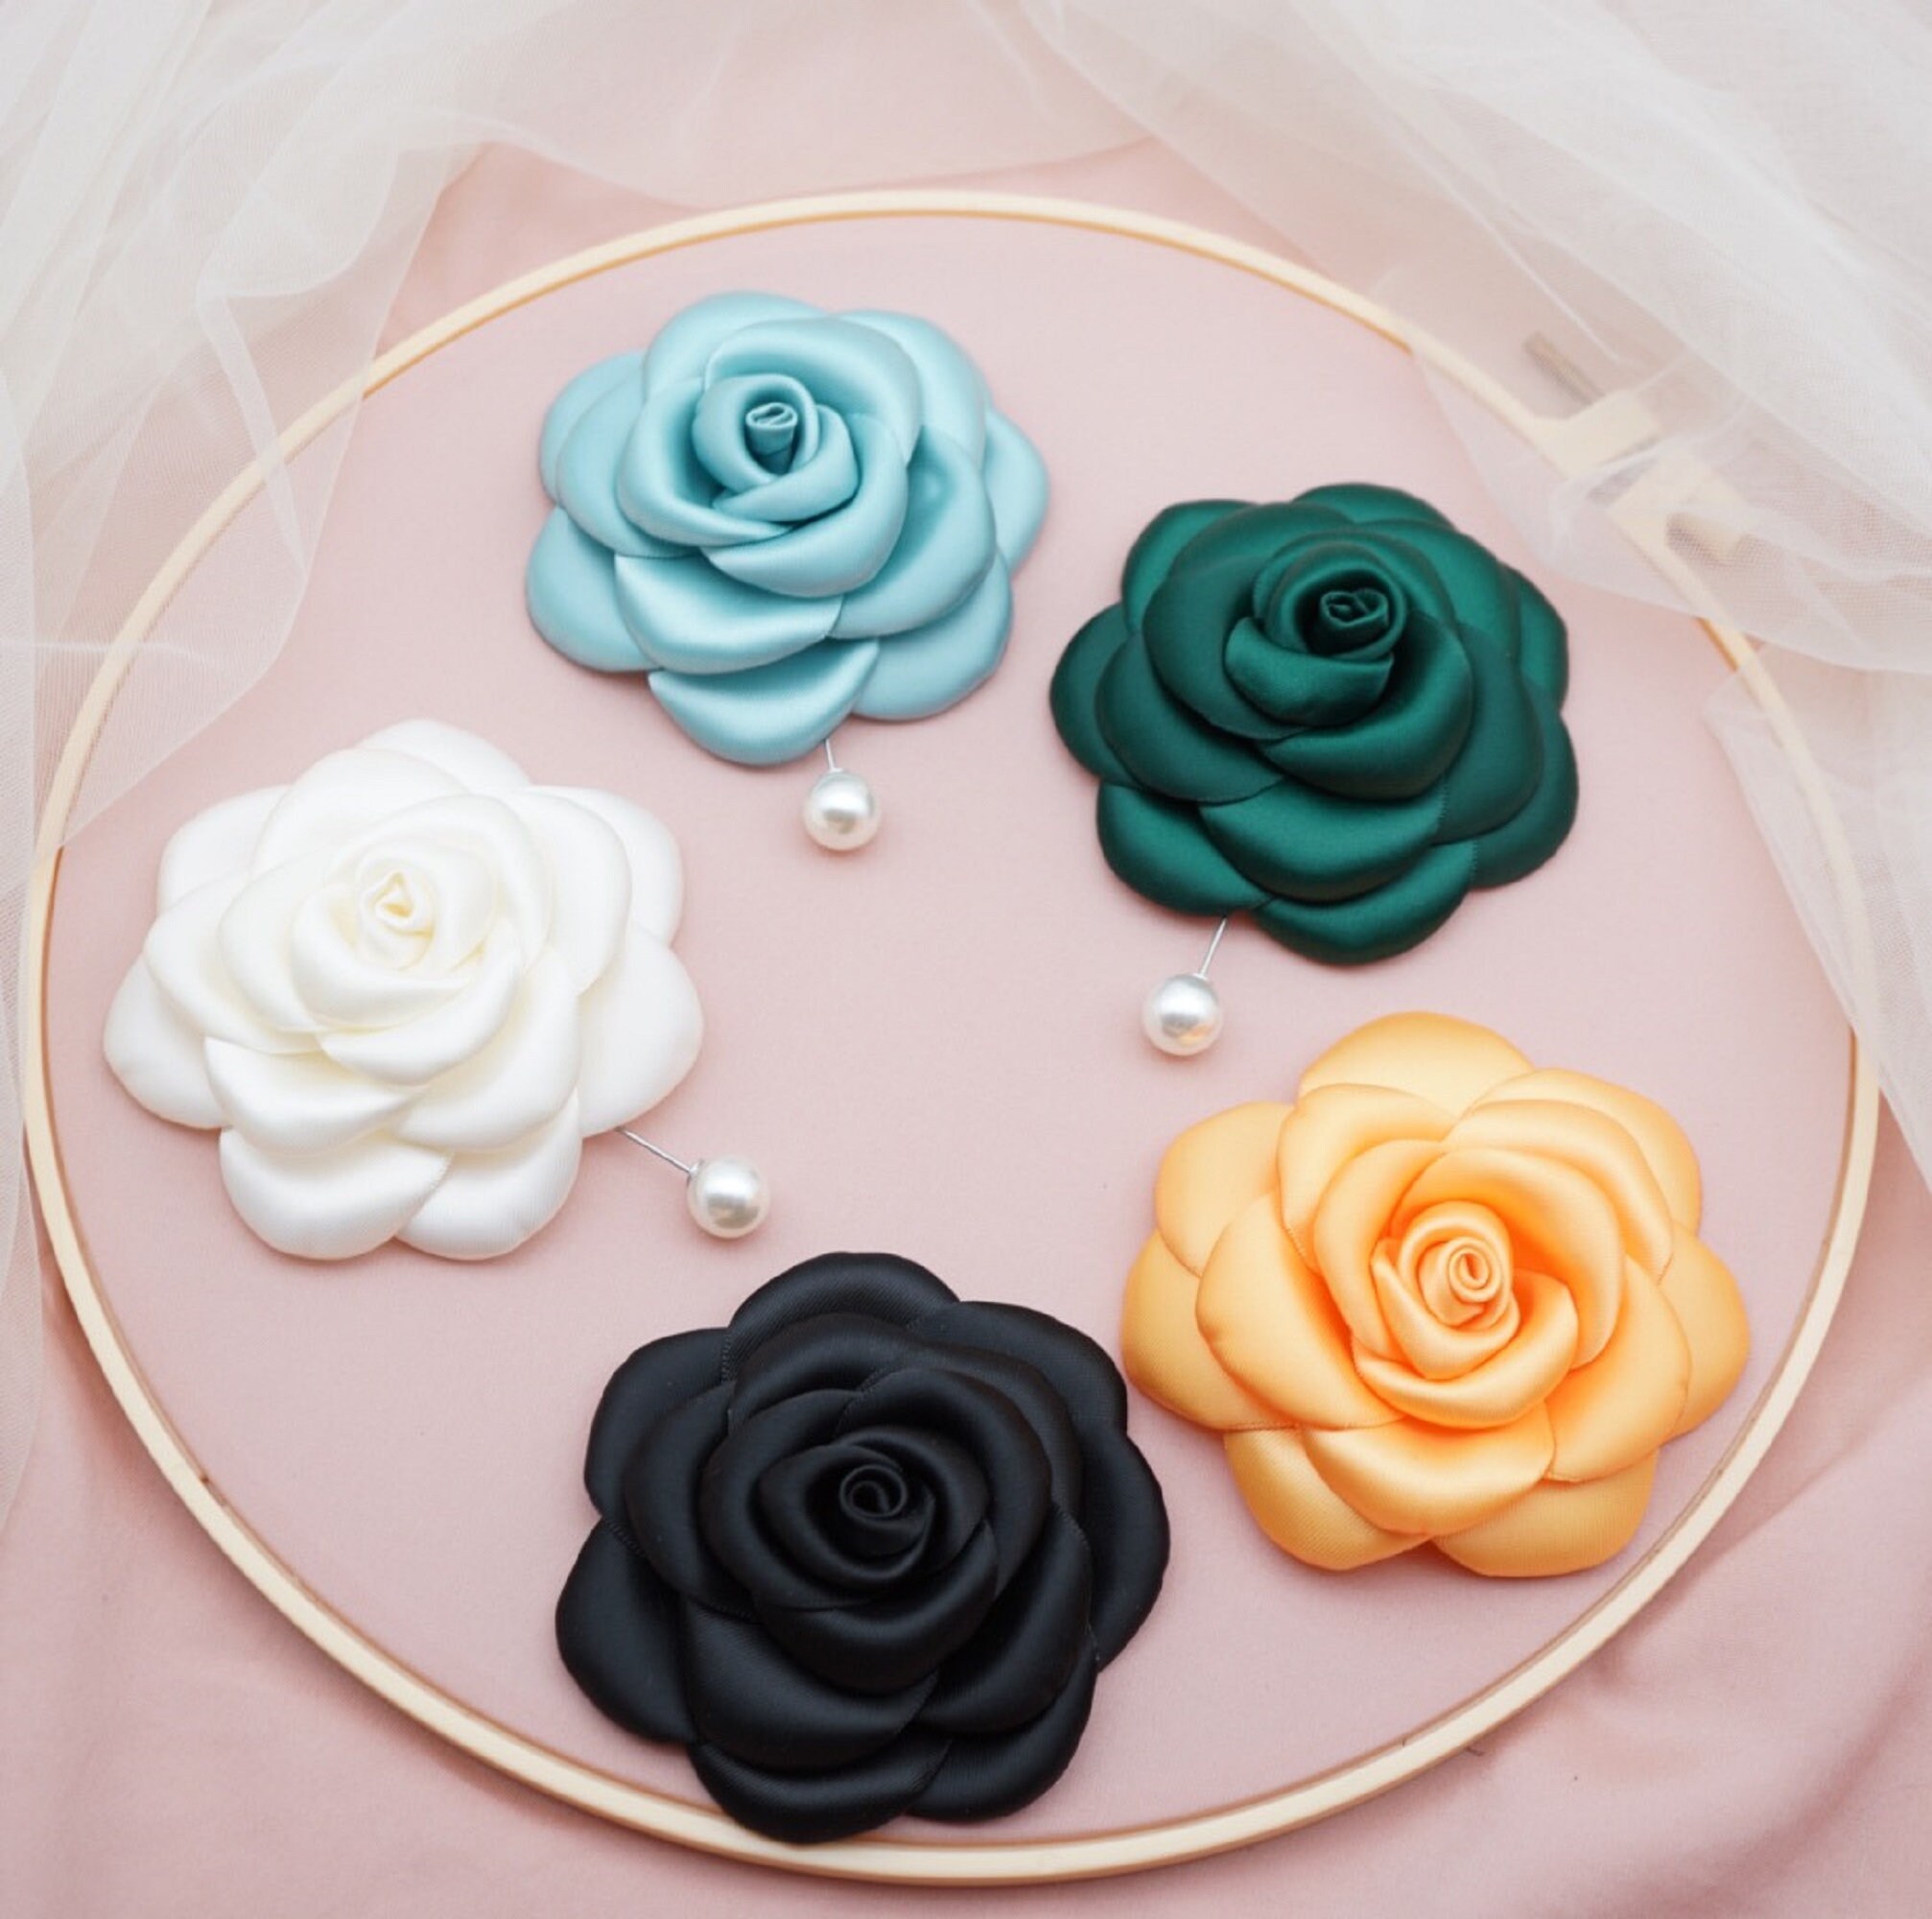 Ribbon Roses FREE Tutorial Graphic by nadia12 · Creative Fabrica